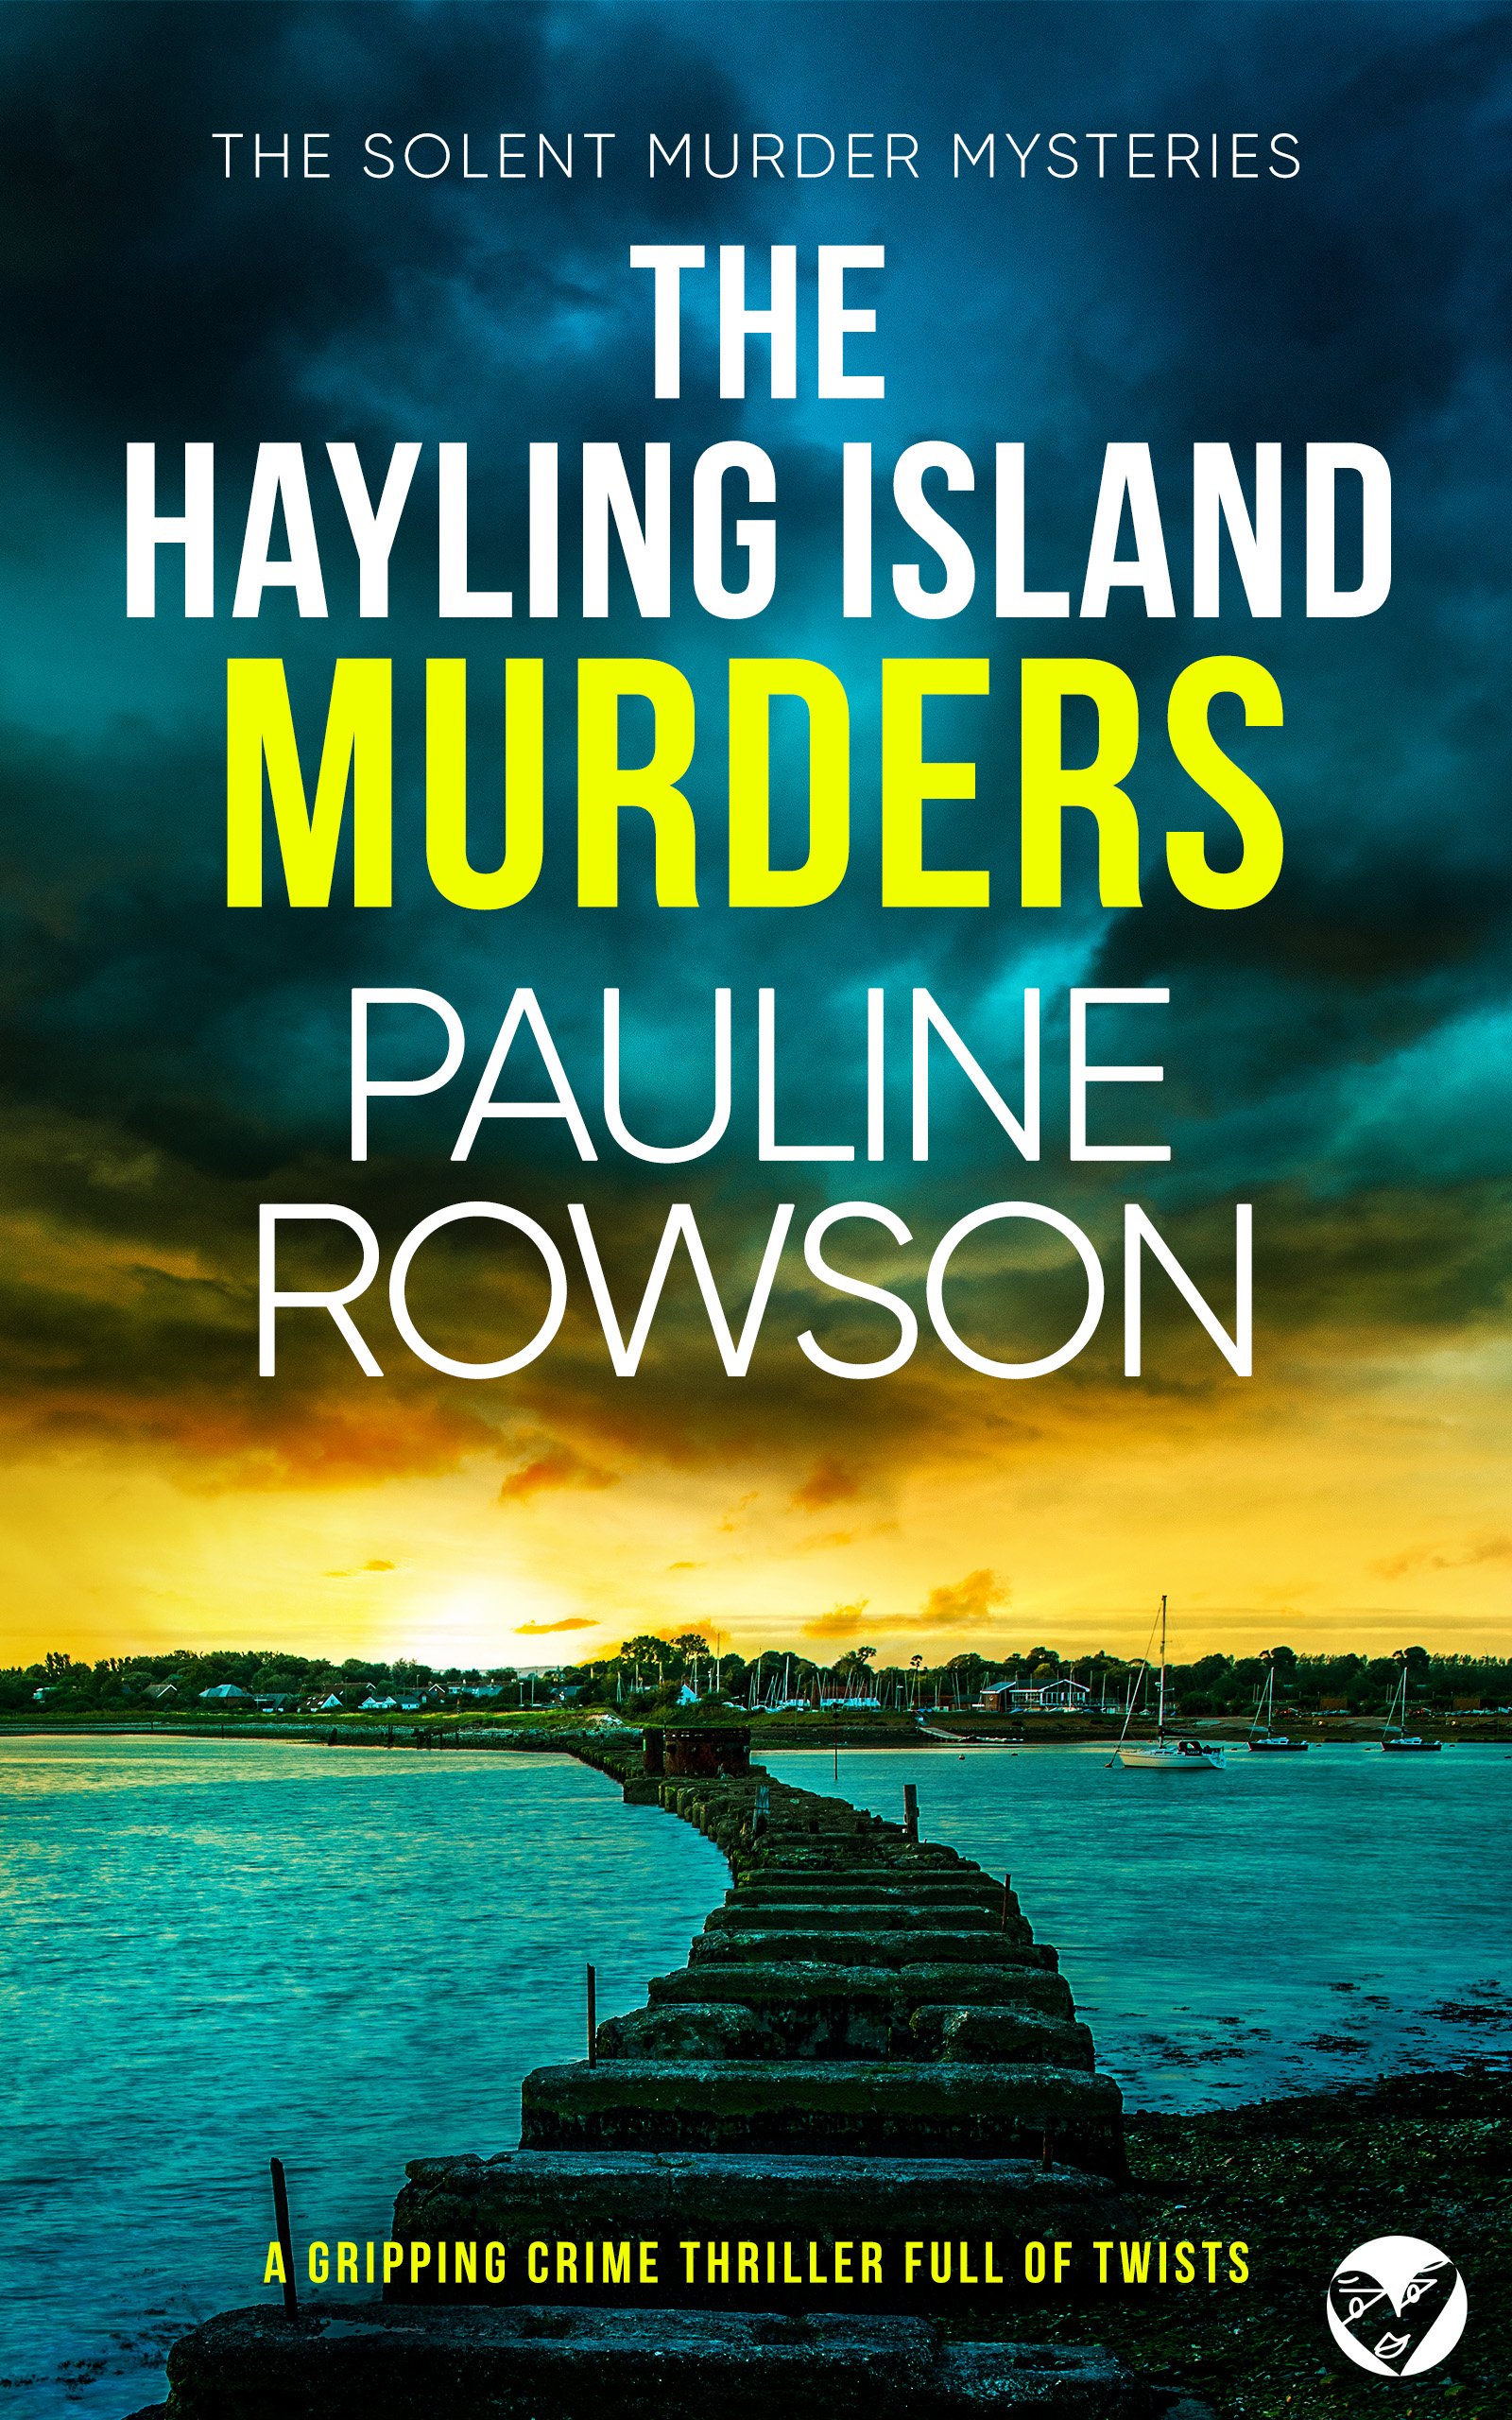 THE HAYLING ISLAND MURDERS Cover publish.jpg